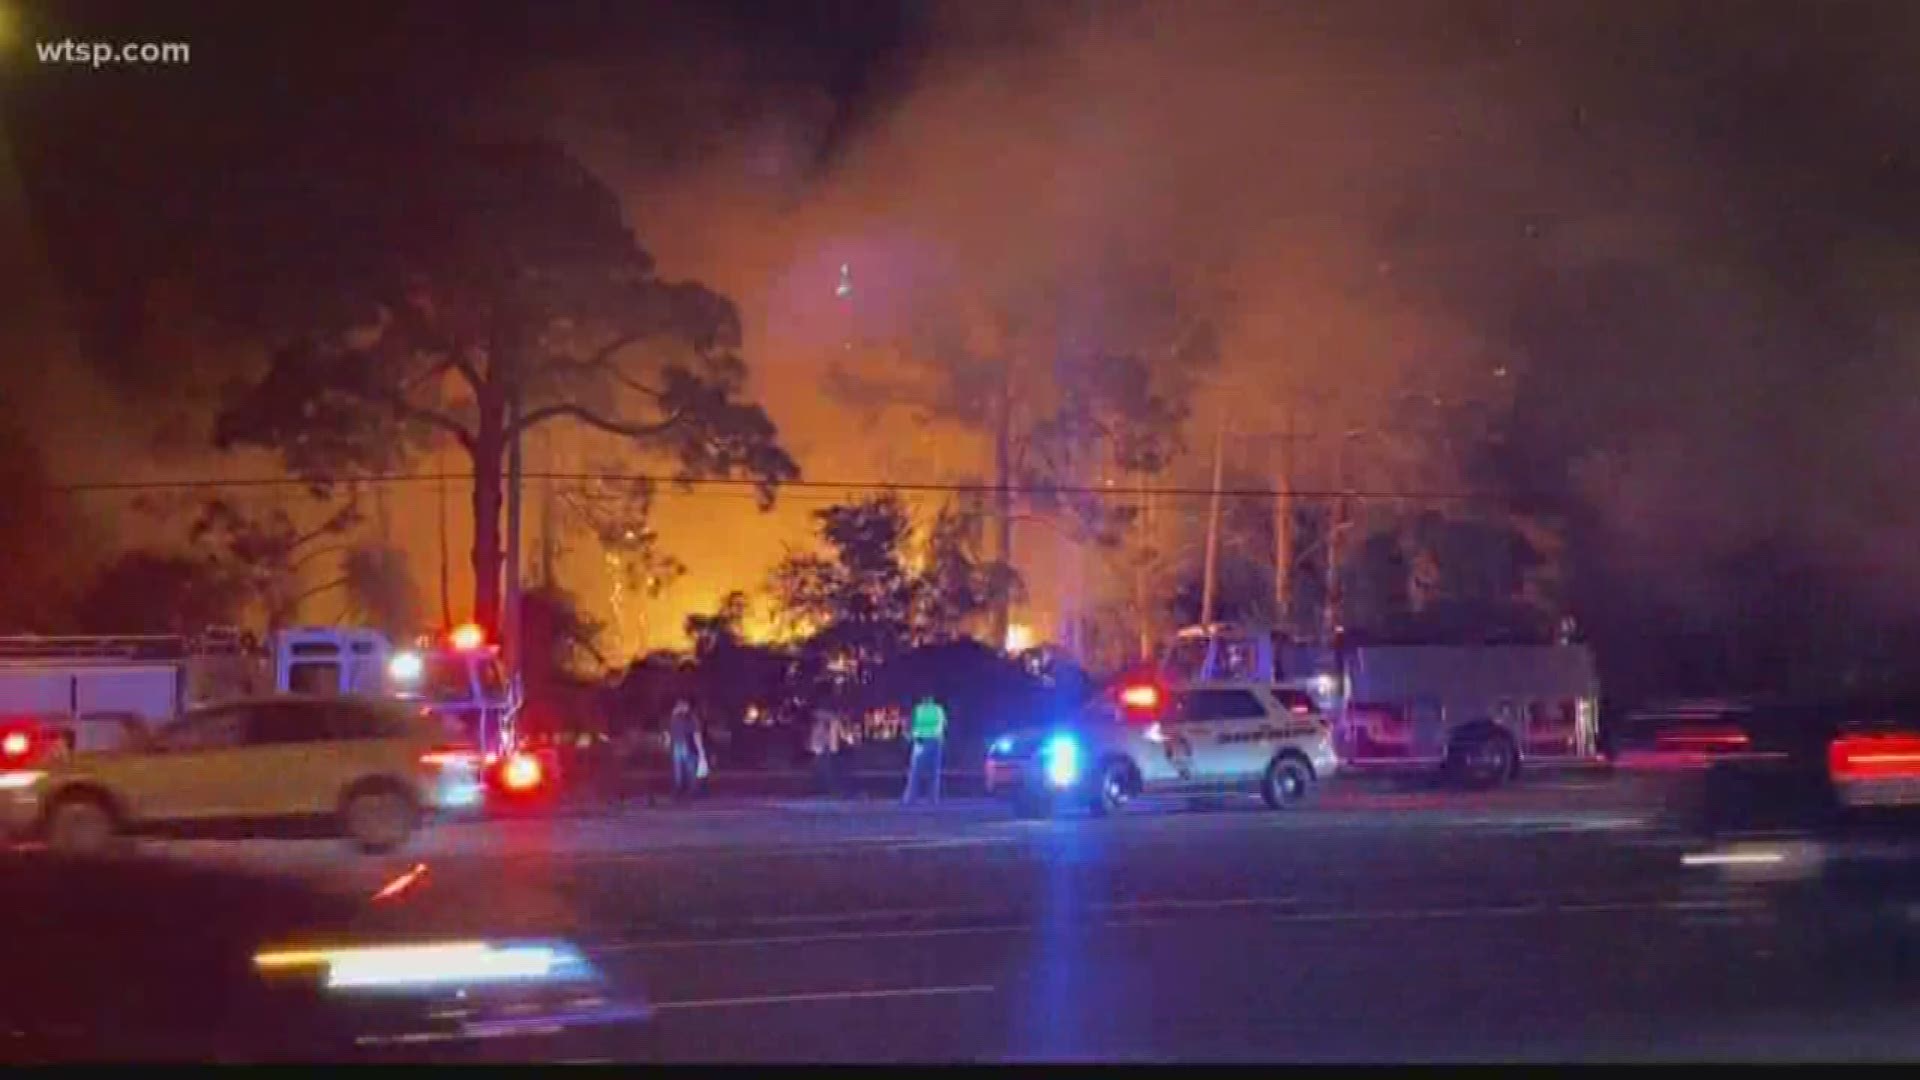 The fire had northbound US 19 at Windsor Road down to one lane Friday night. The fire is about a half an acre big, according to Pasco Fire Rescue.